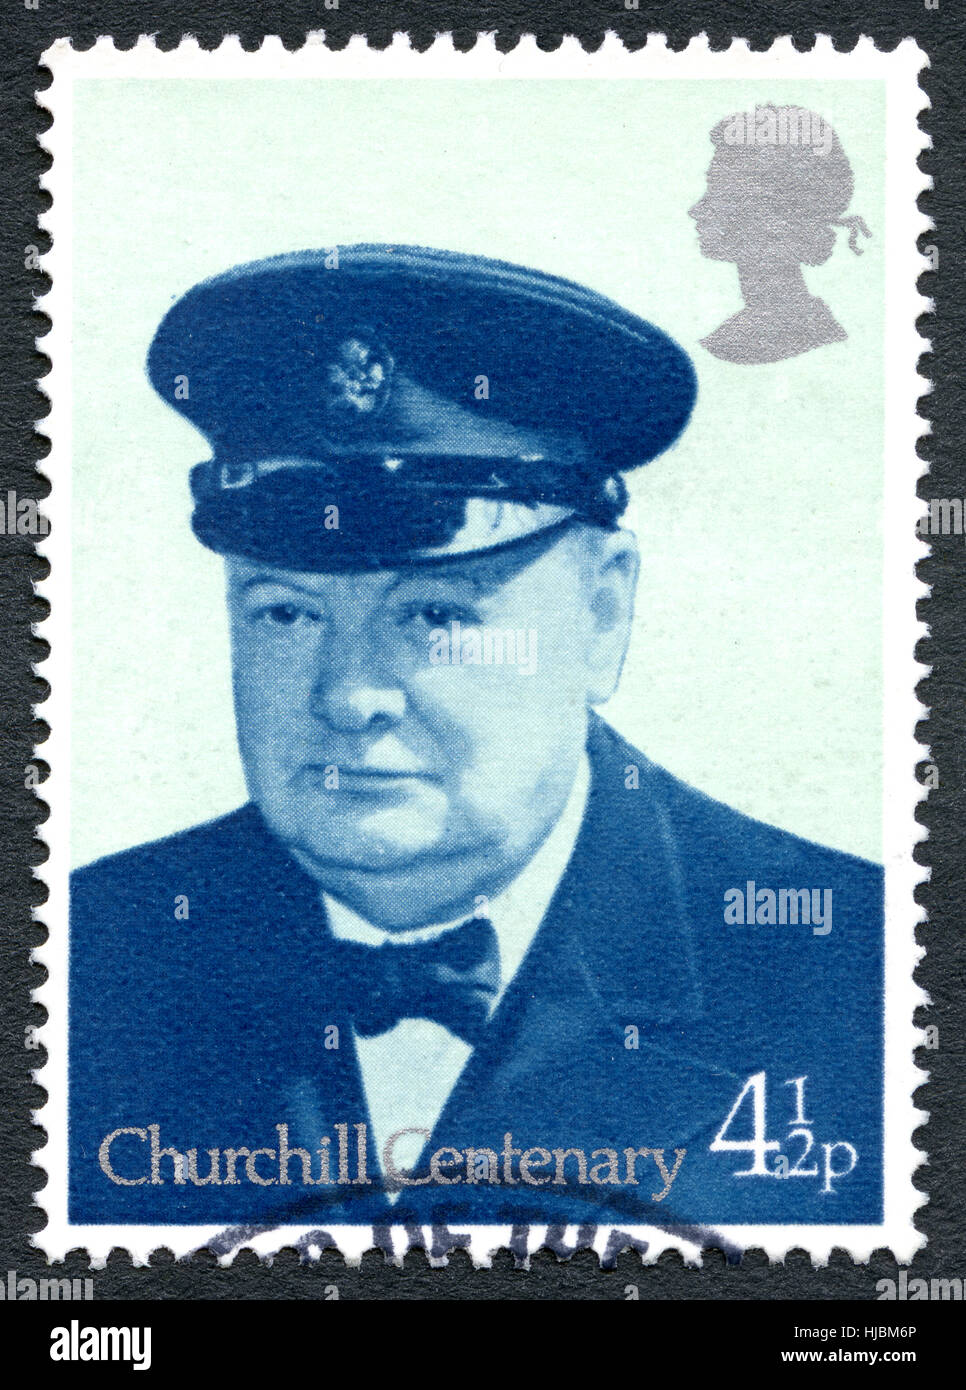 GREAT BRITAIN - CIRCA 1974: A used postage stamp from the UK, depicting a portrait of former British Prime Minister Sir Winston Churchill, circa 1974. Stock Photo